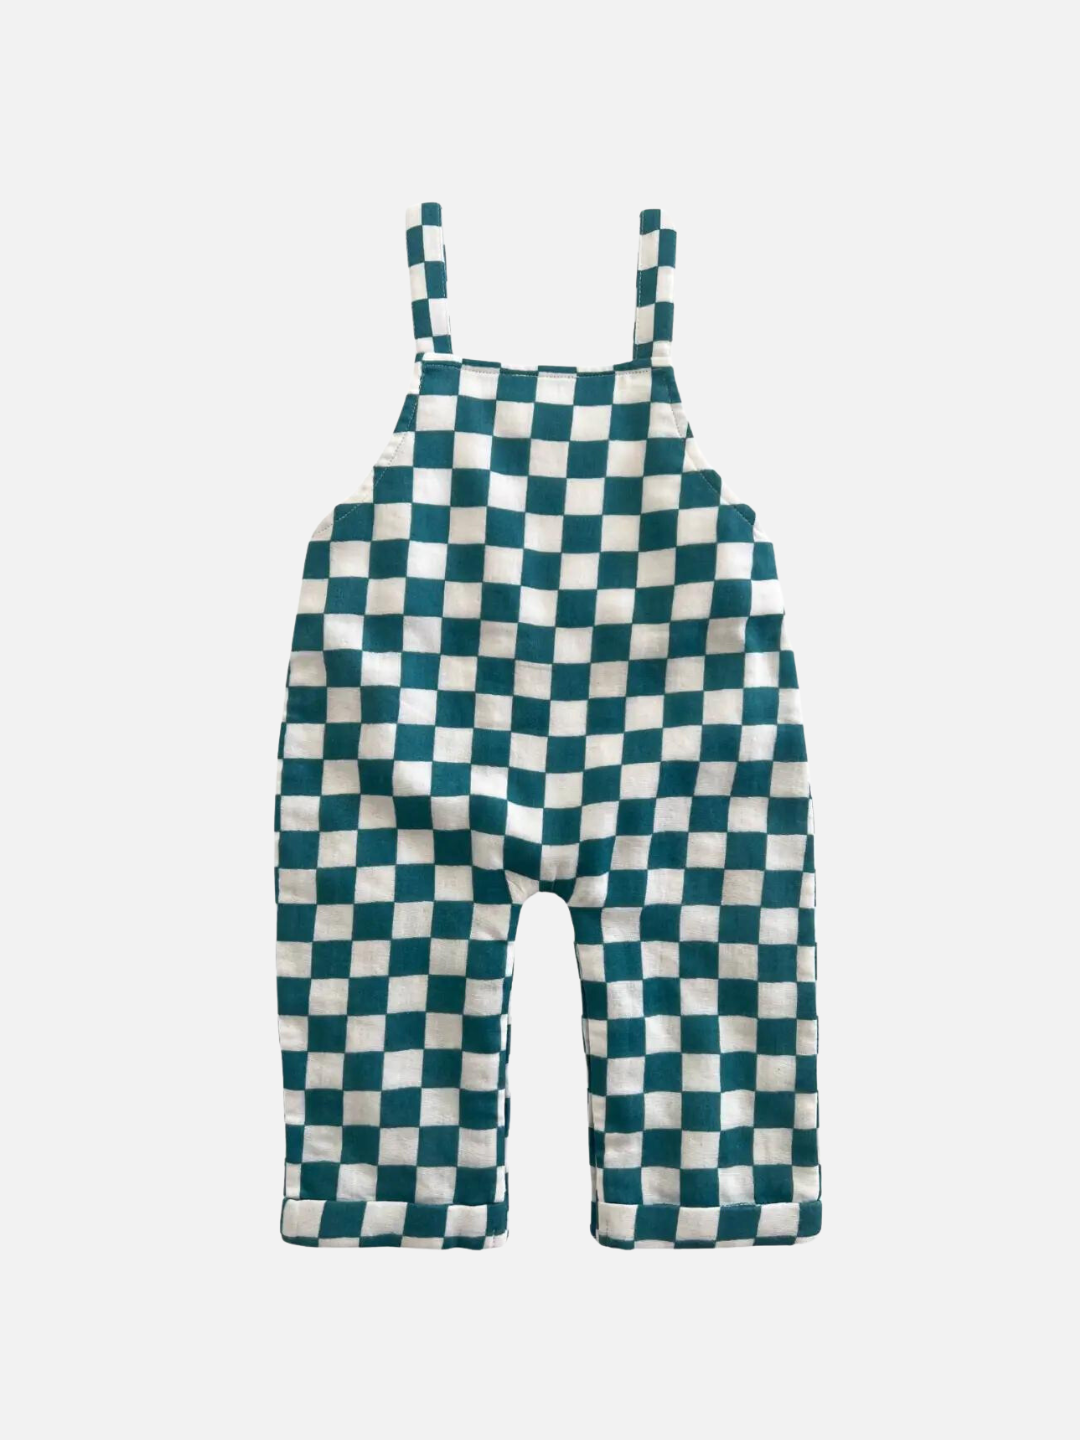 A pair of kids' overalls in aquamarine and white check, back view